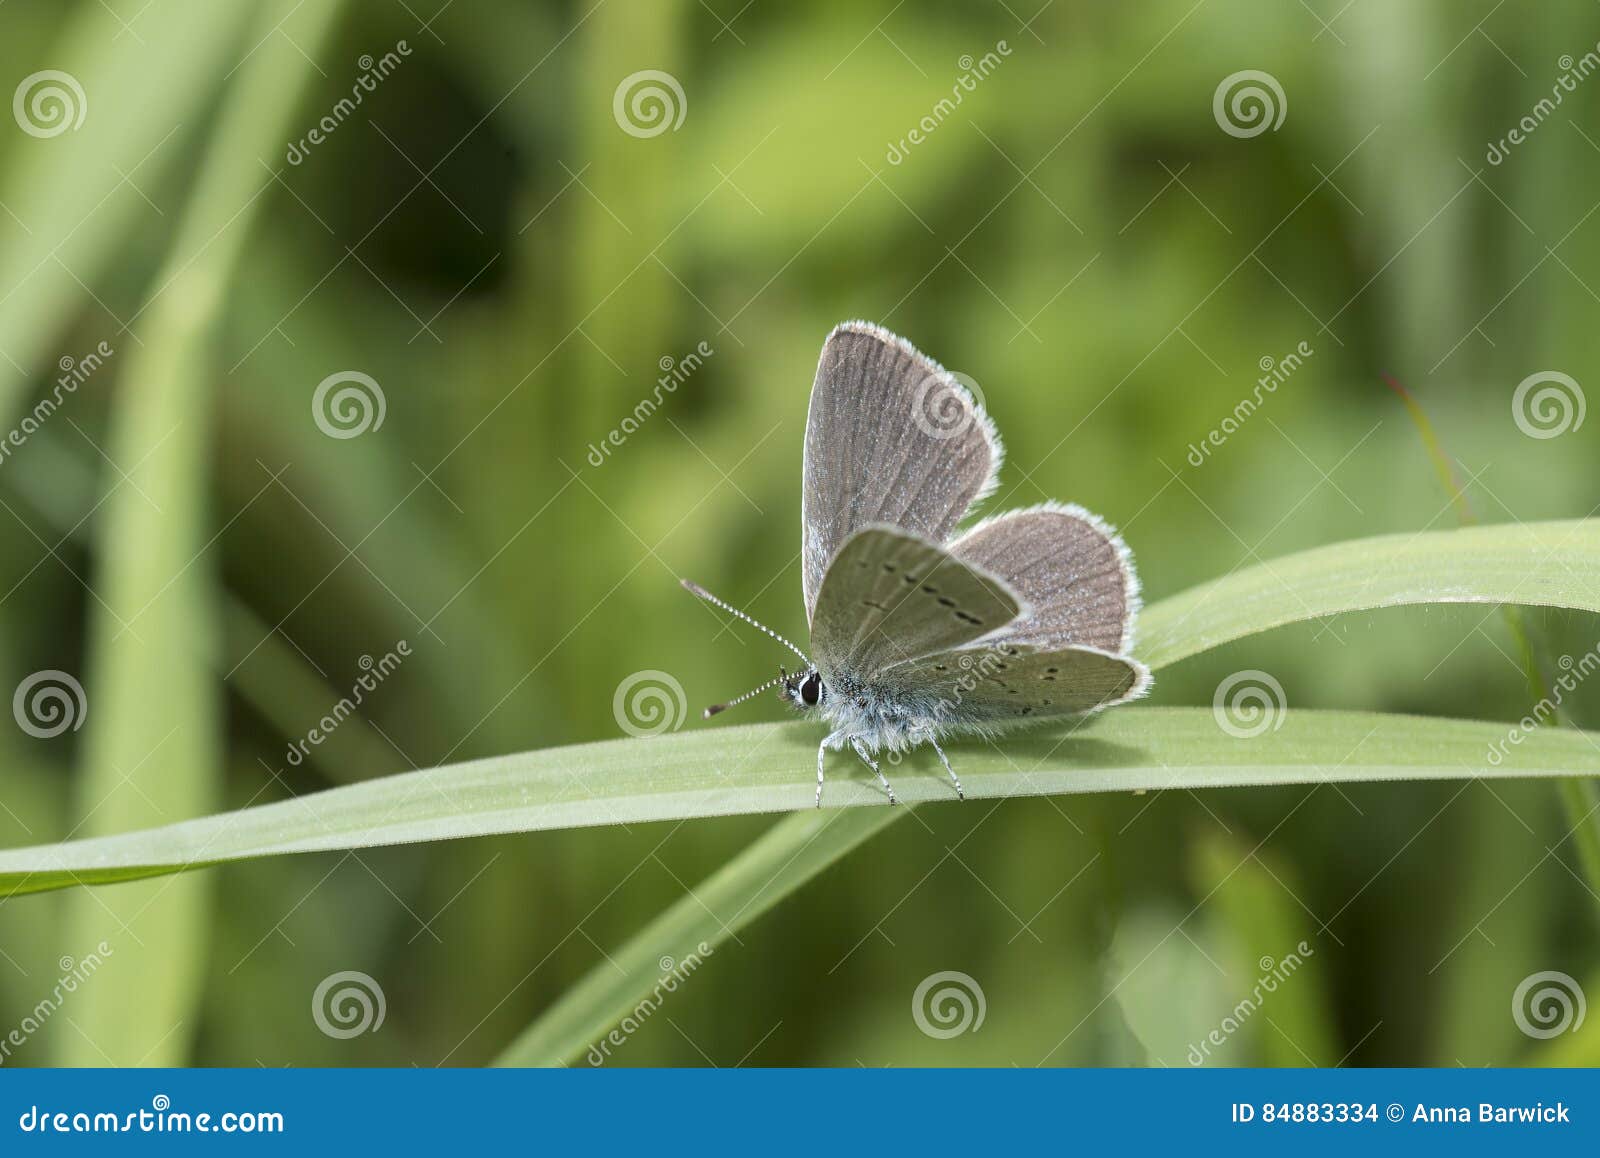 small blue butterfly, cupido minimus, on a blade of grass